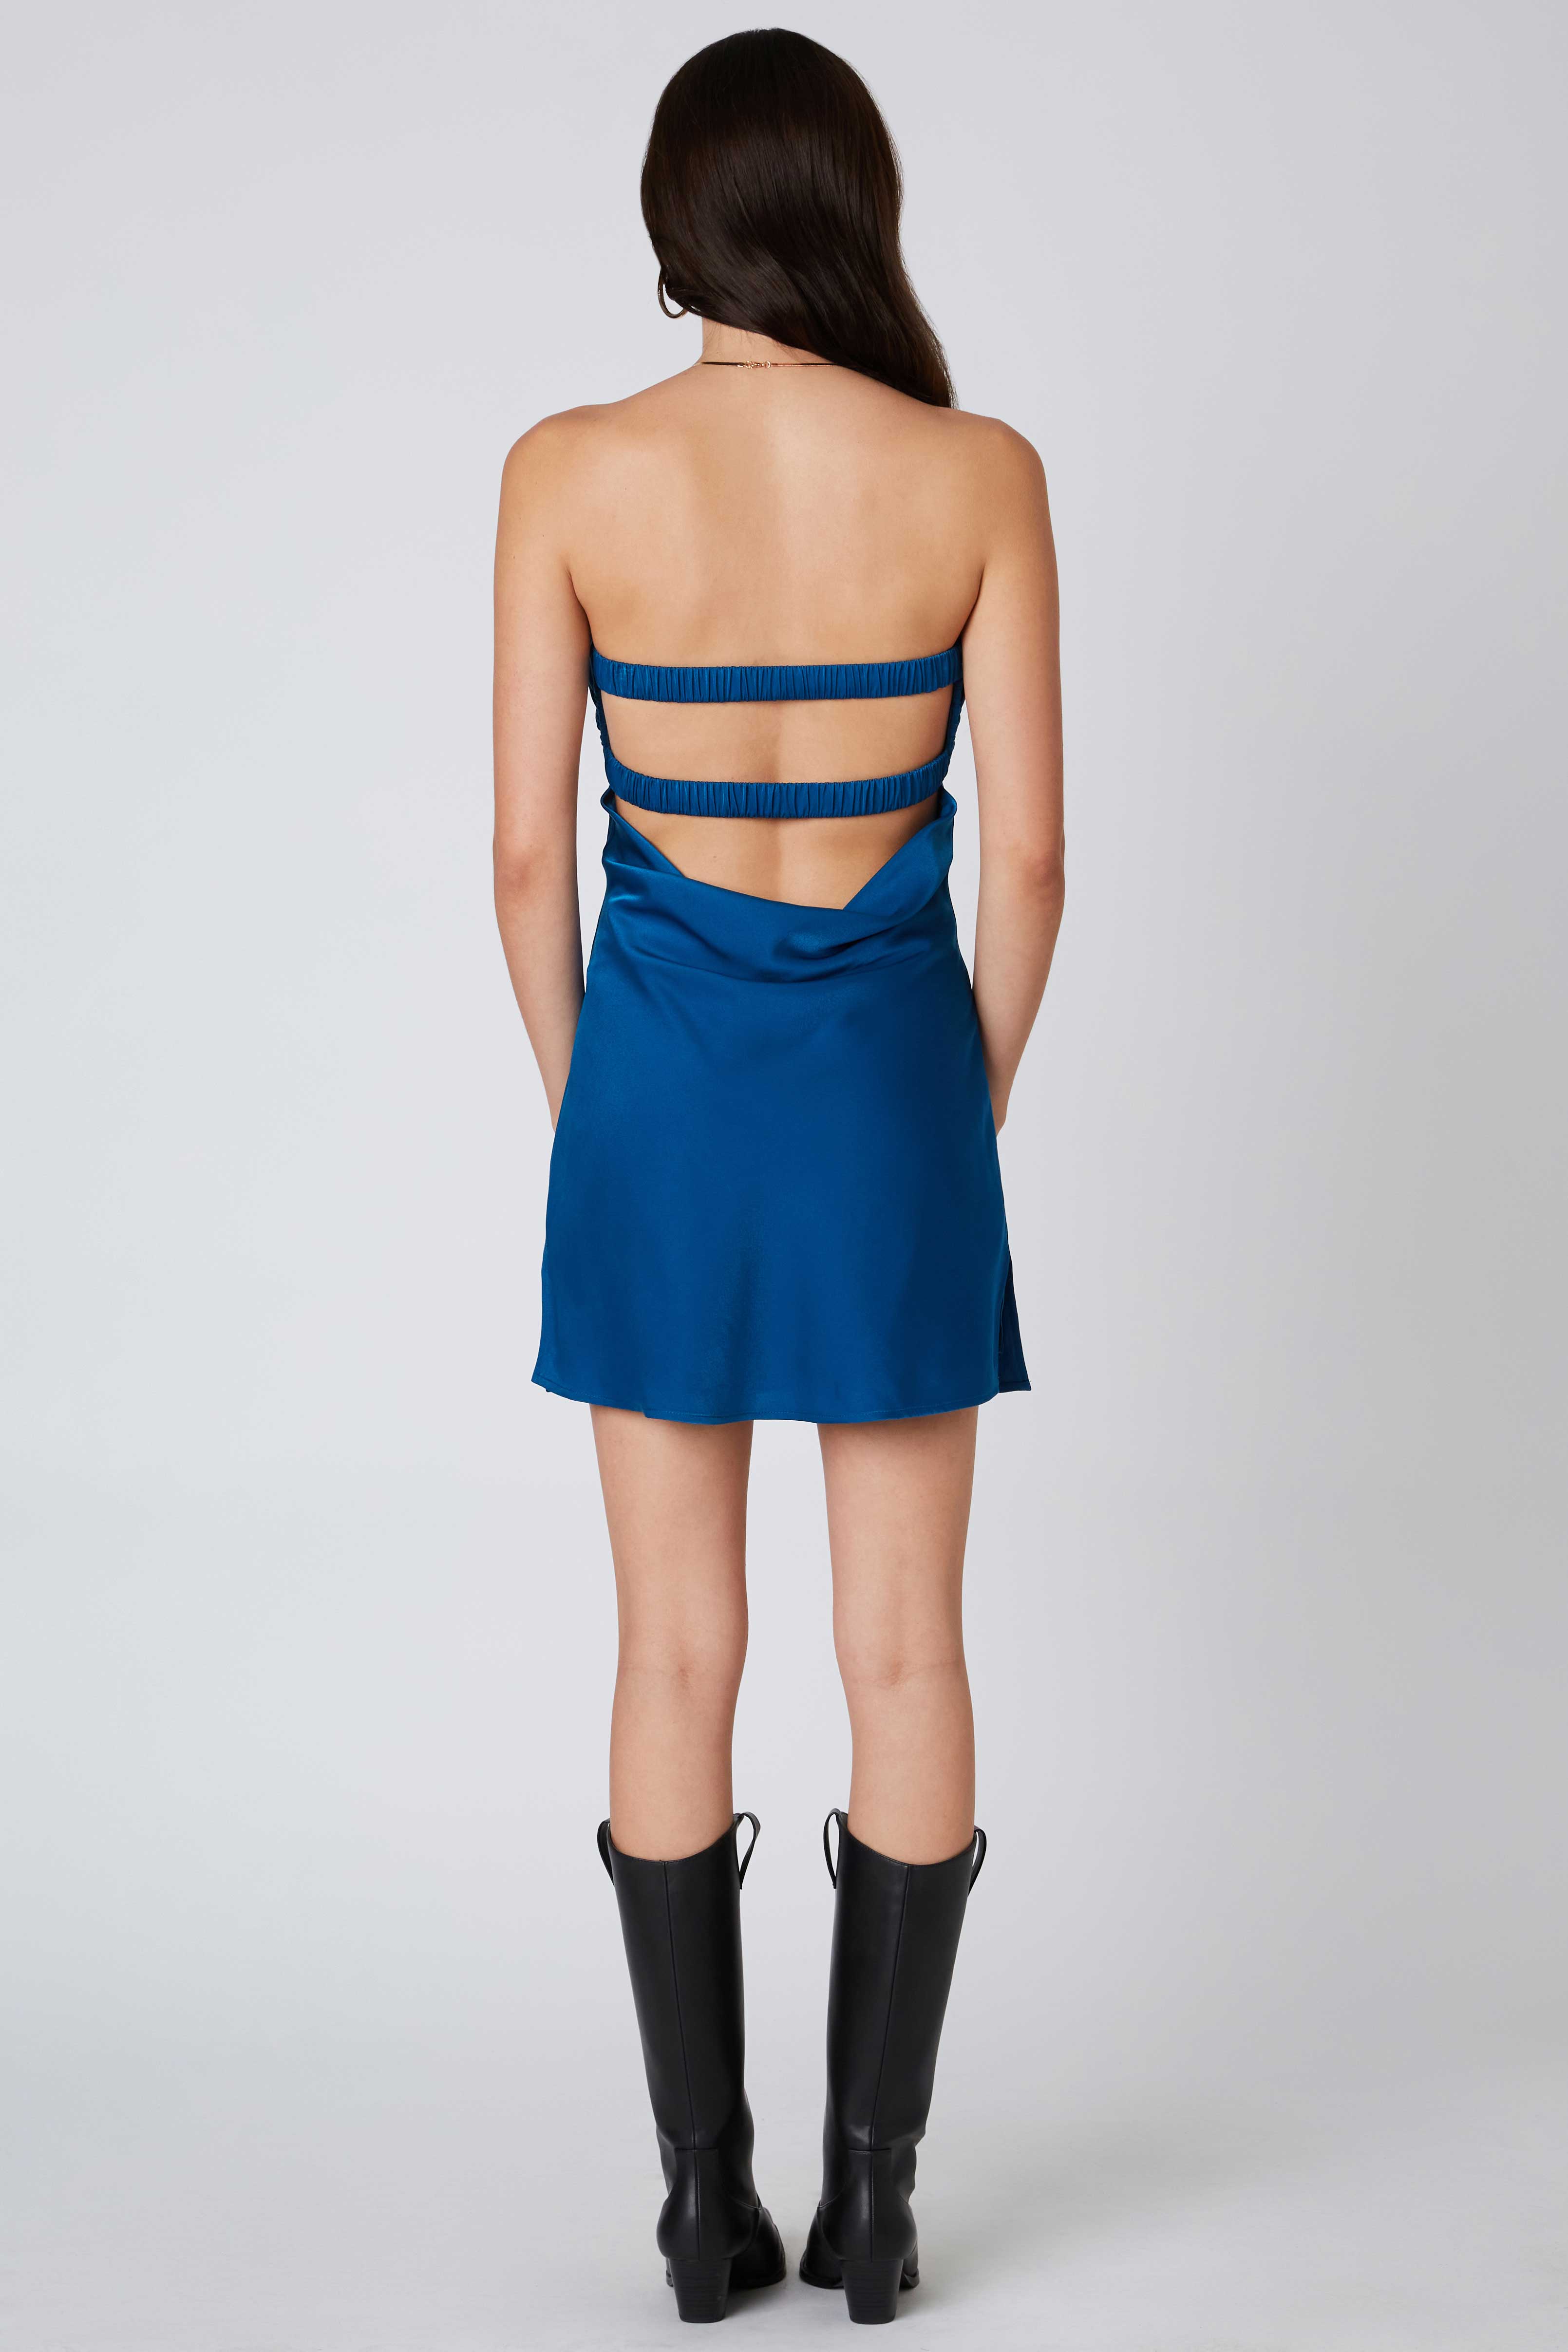 Strapless Satin Mini Dress in Teal Blue Back View